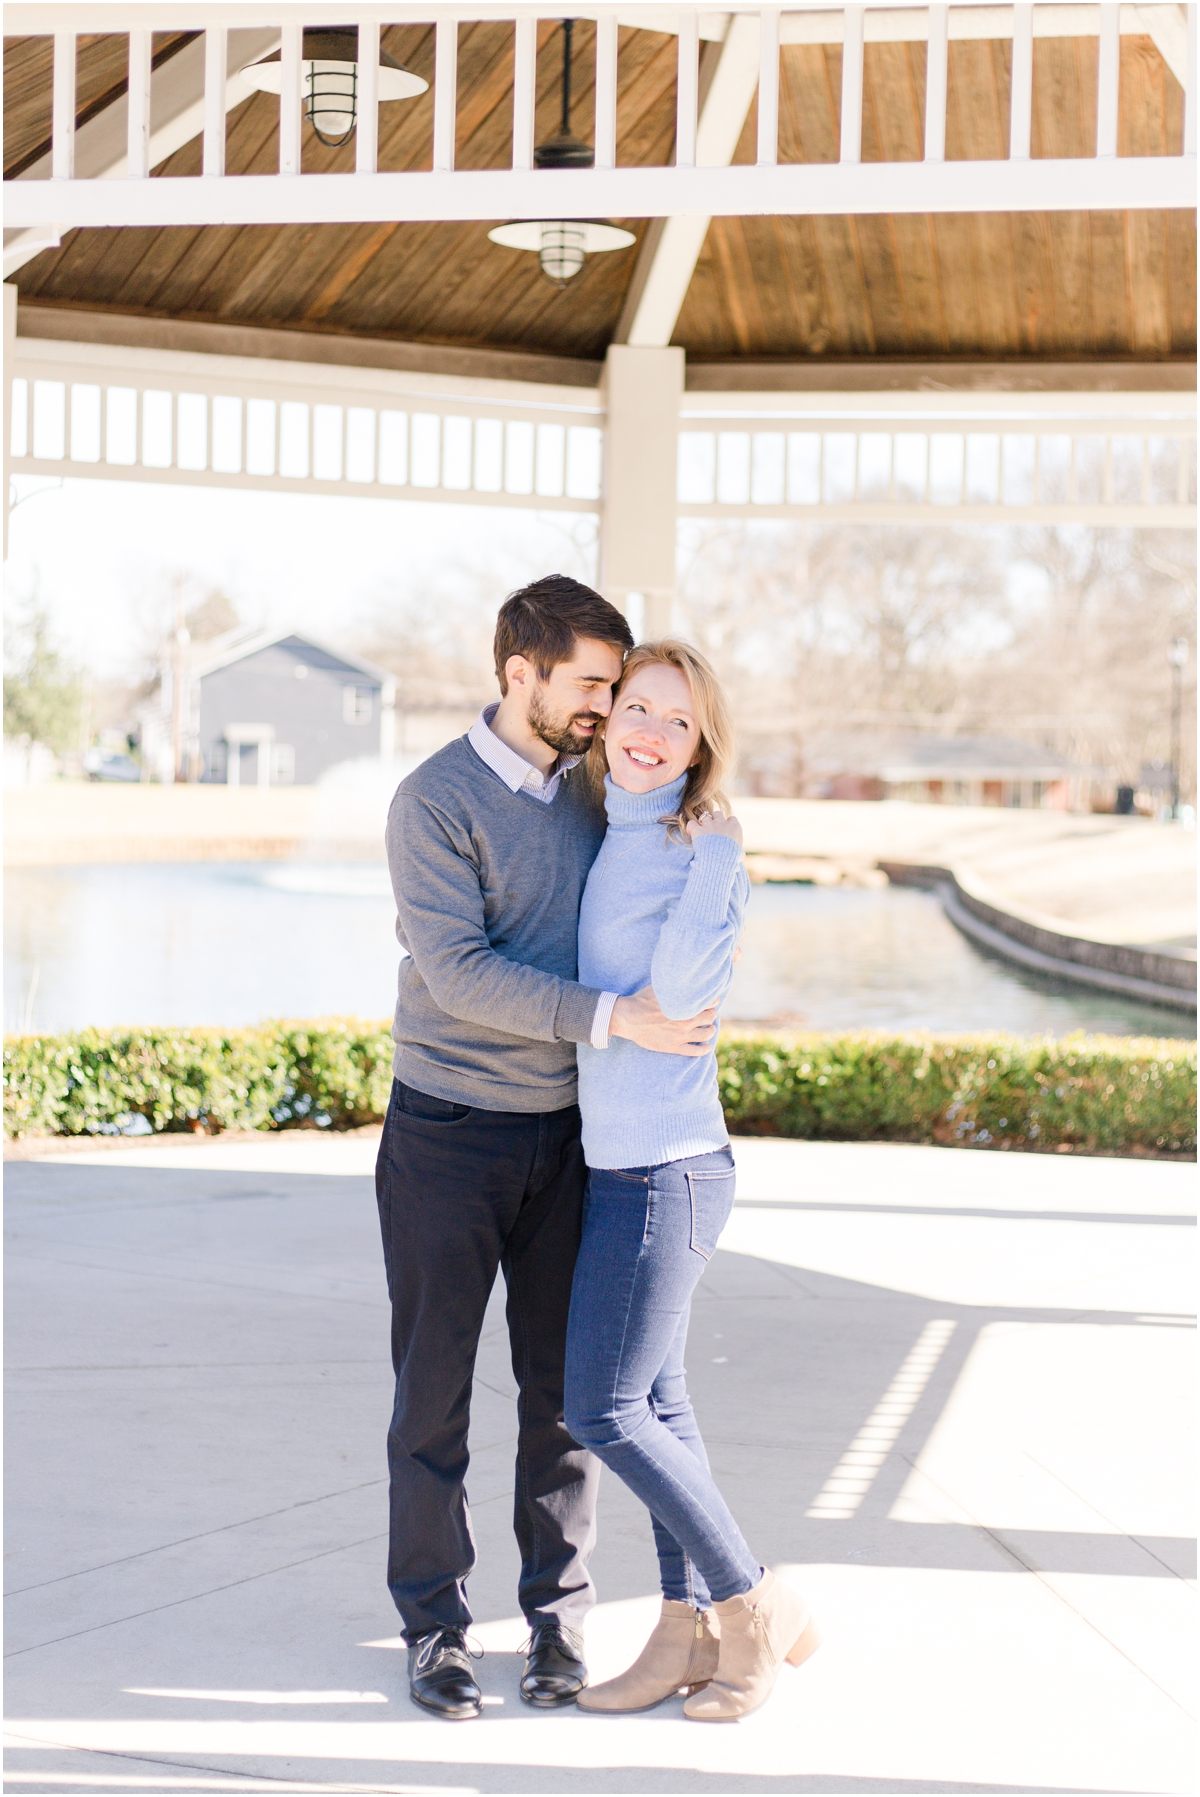 Winter engagement session in downtown Greer, SC at the gazebo